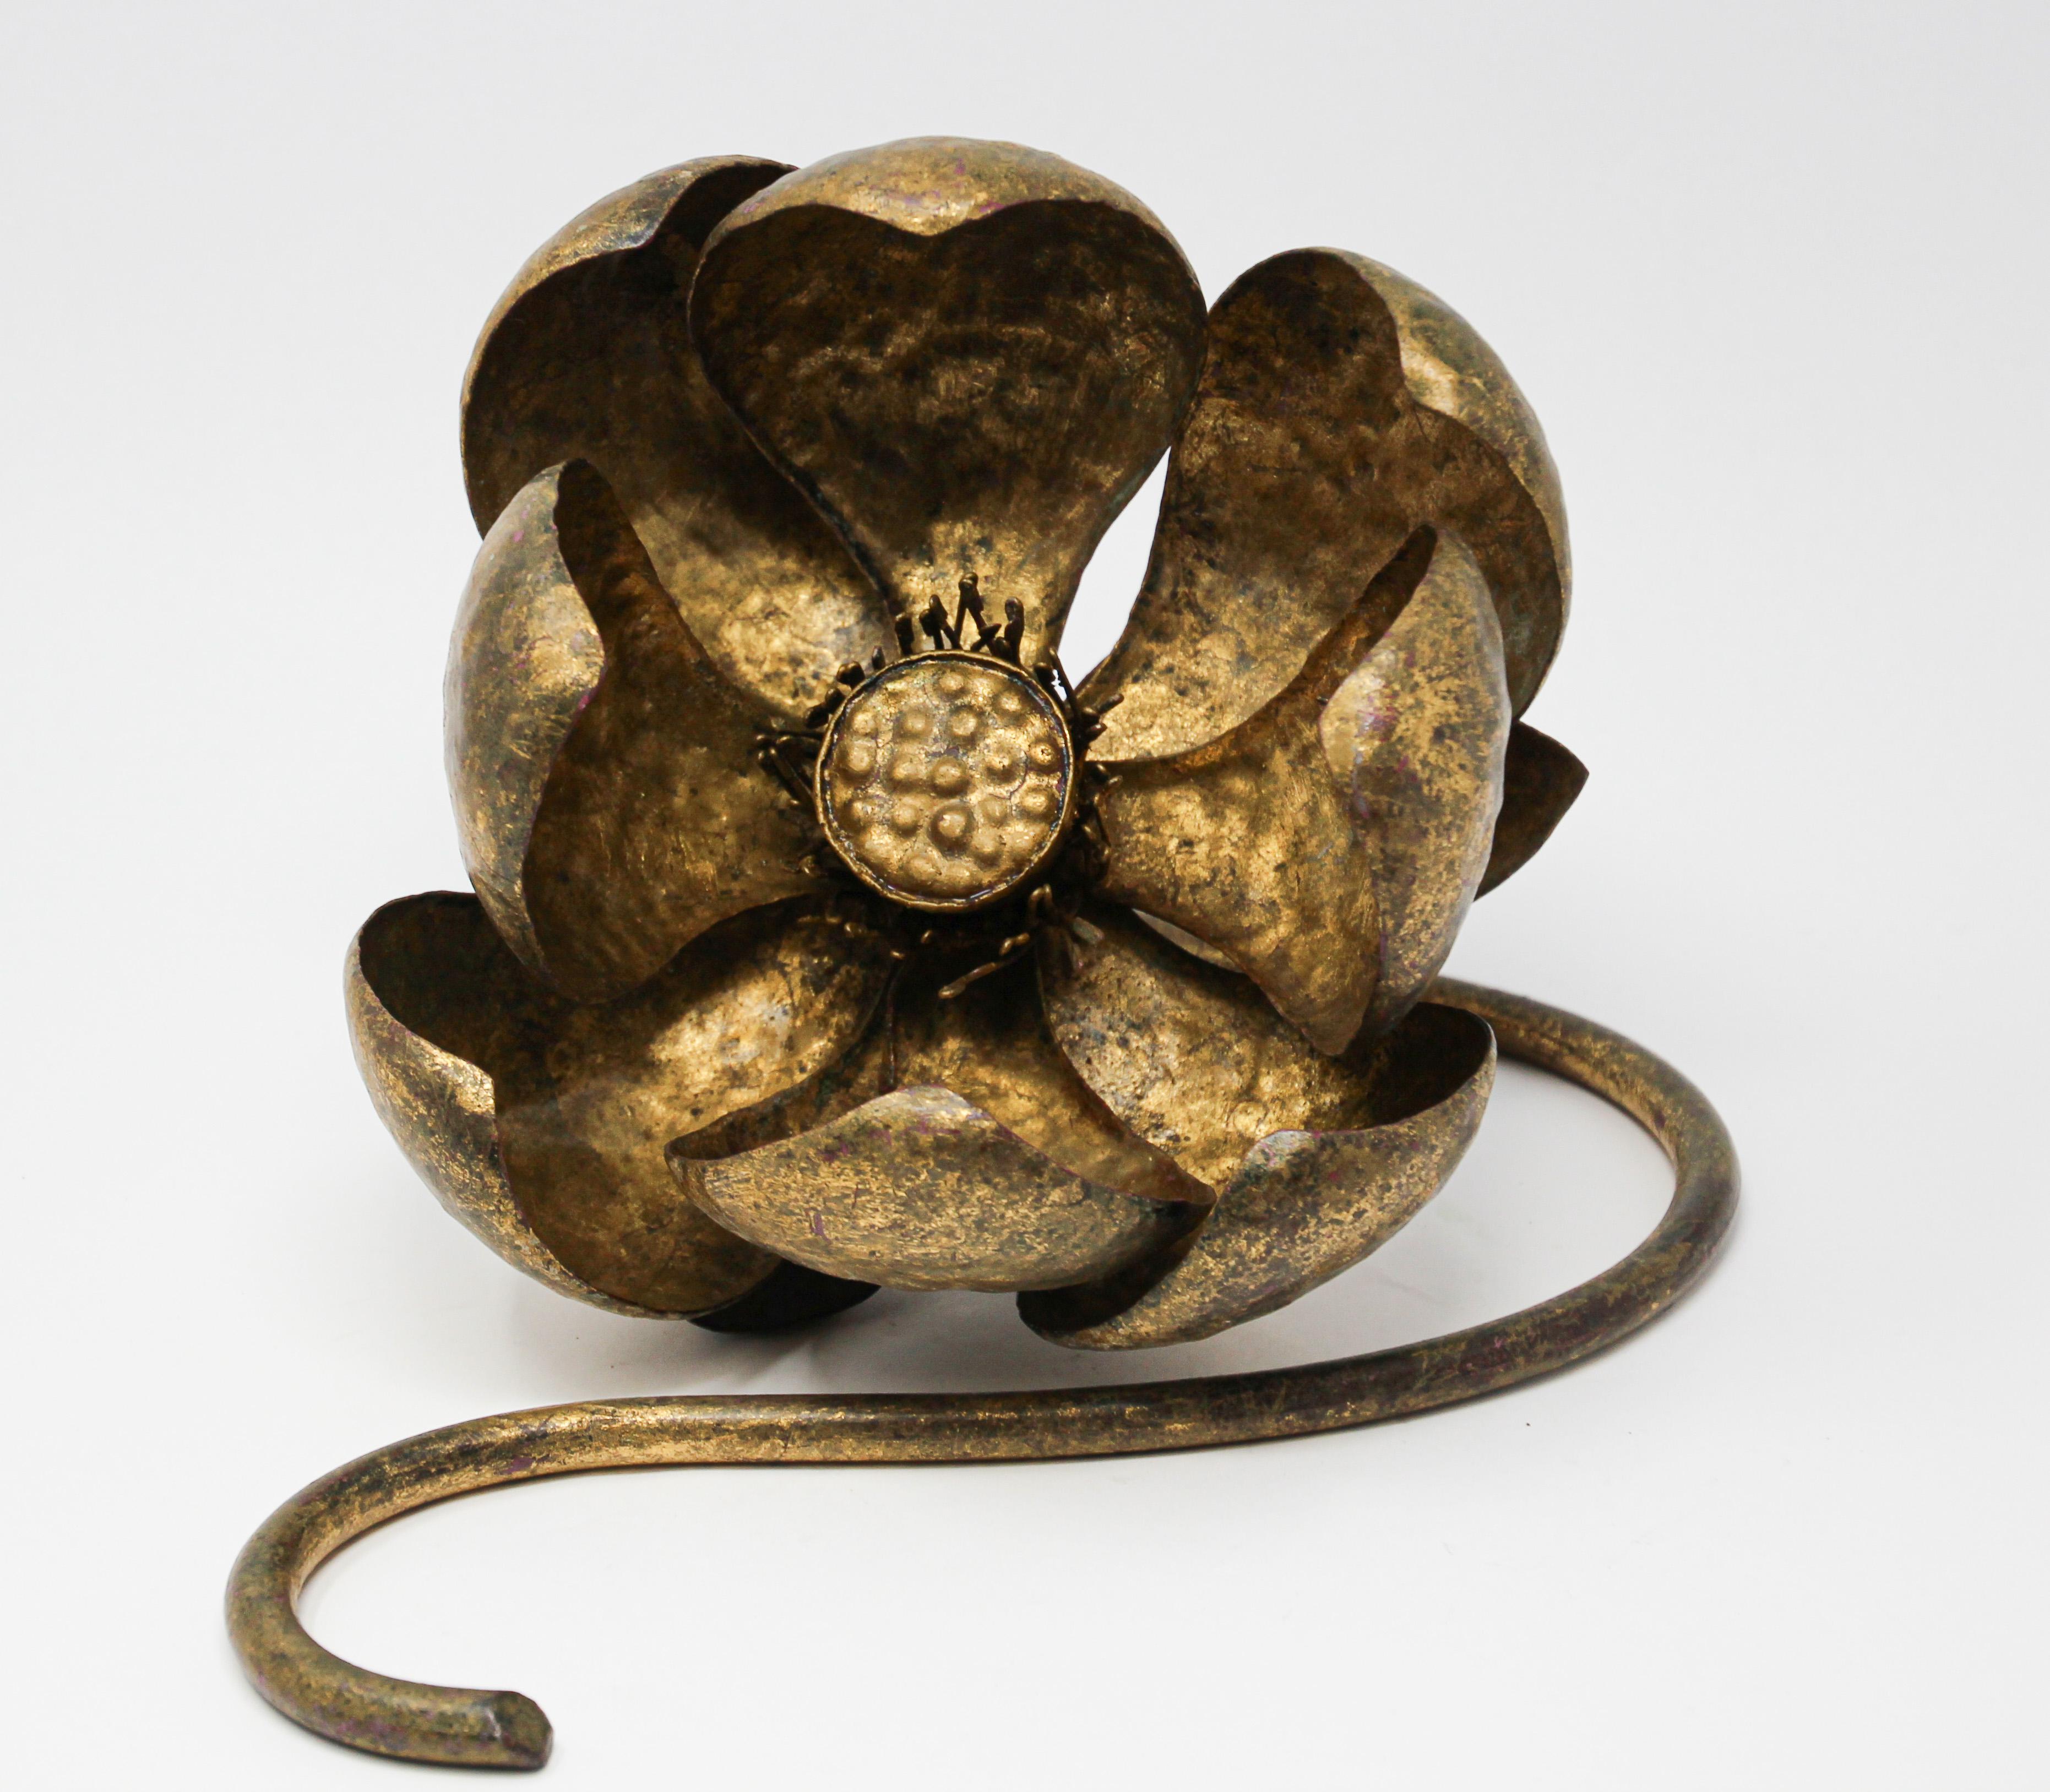 Gilt metal lotus flower sculpture or wall hanging by Sante Mingazzi designer.
Lotus flower shaped, handcrafted and hammered delicately in the Florentine gilt tole style.
Hollywood Regency style with original gold leaf in good condition.
Sticker